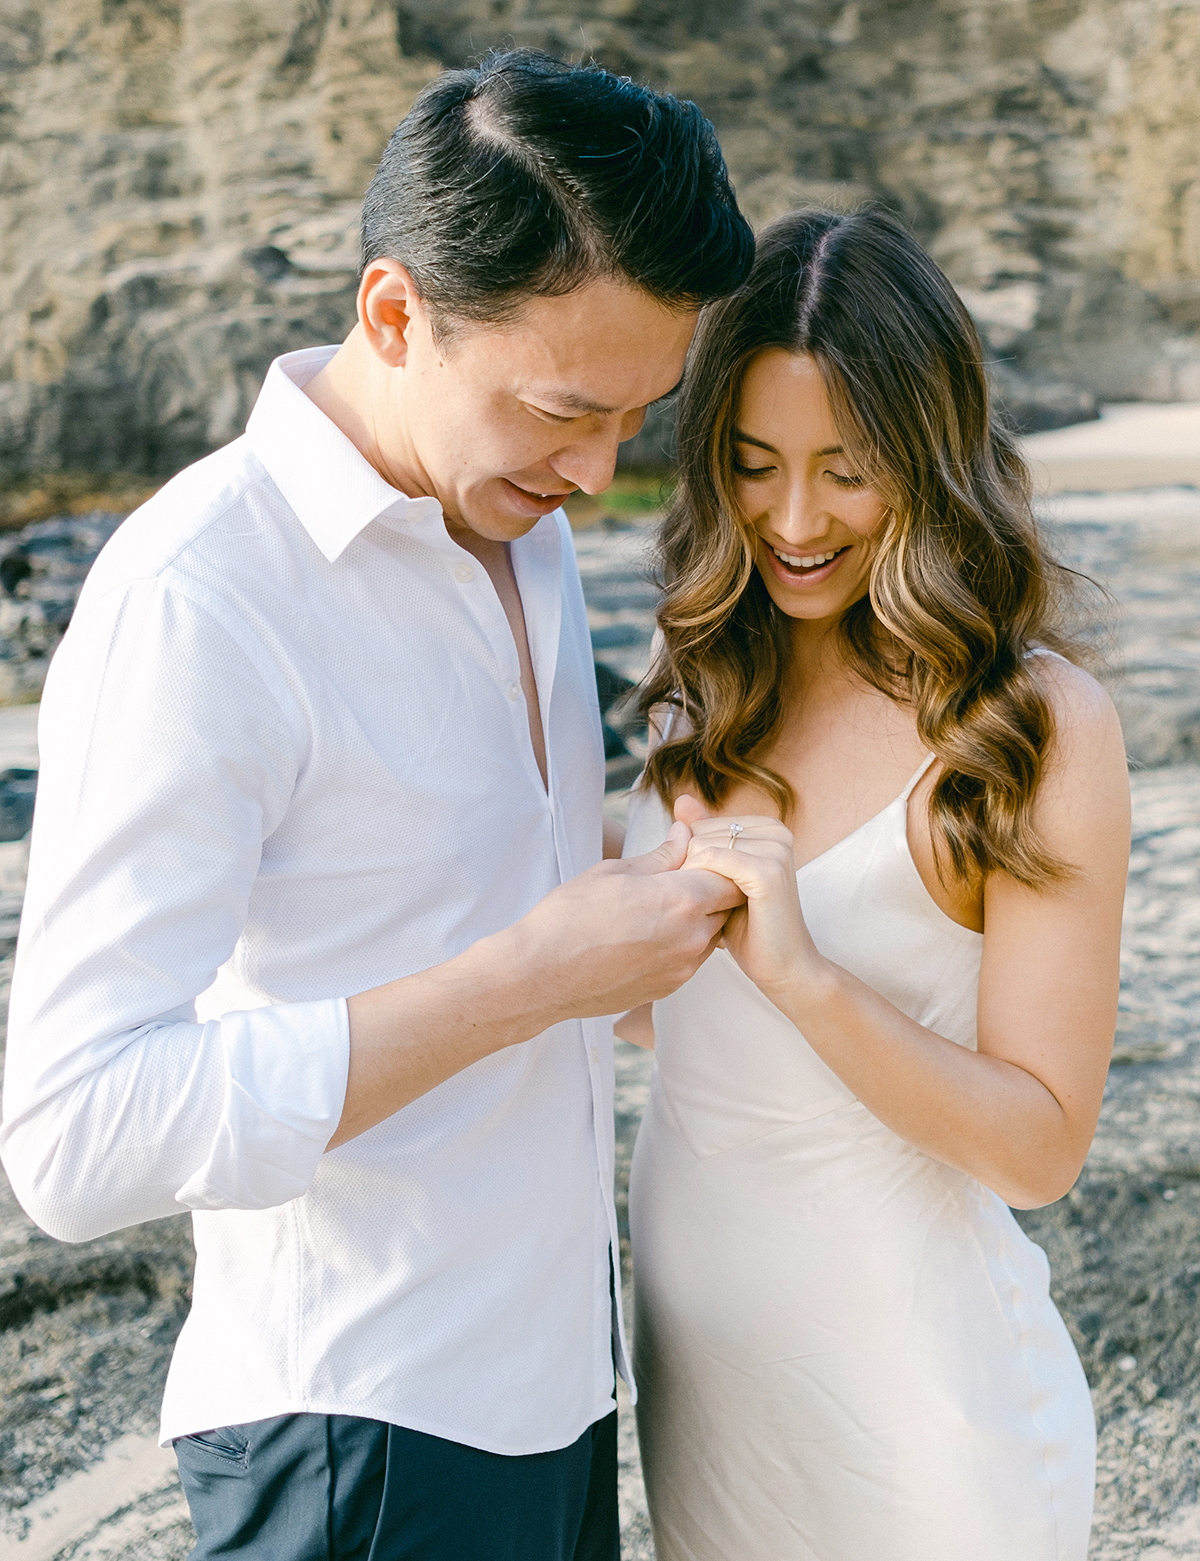 Hawaii proposal photographer | How to propose in Hawaii by Laura Ivanova Photography